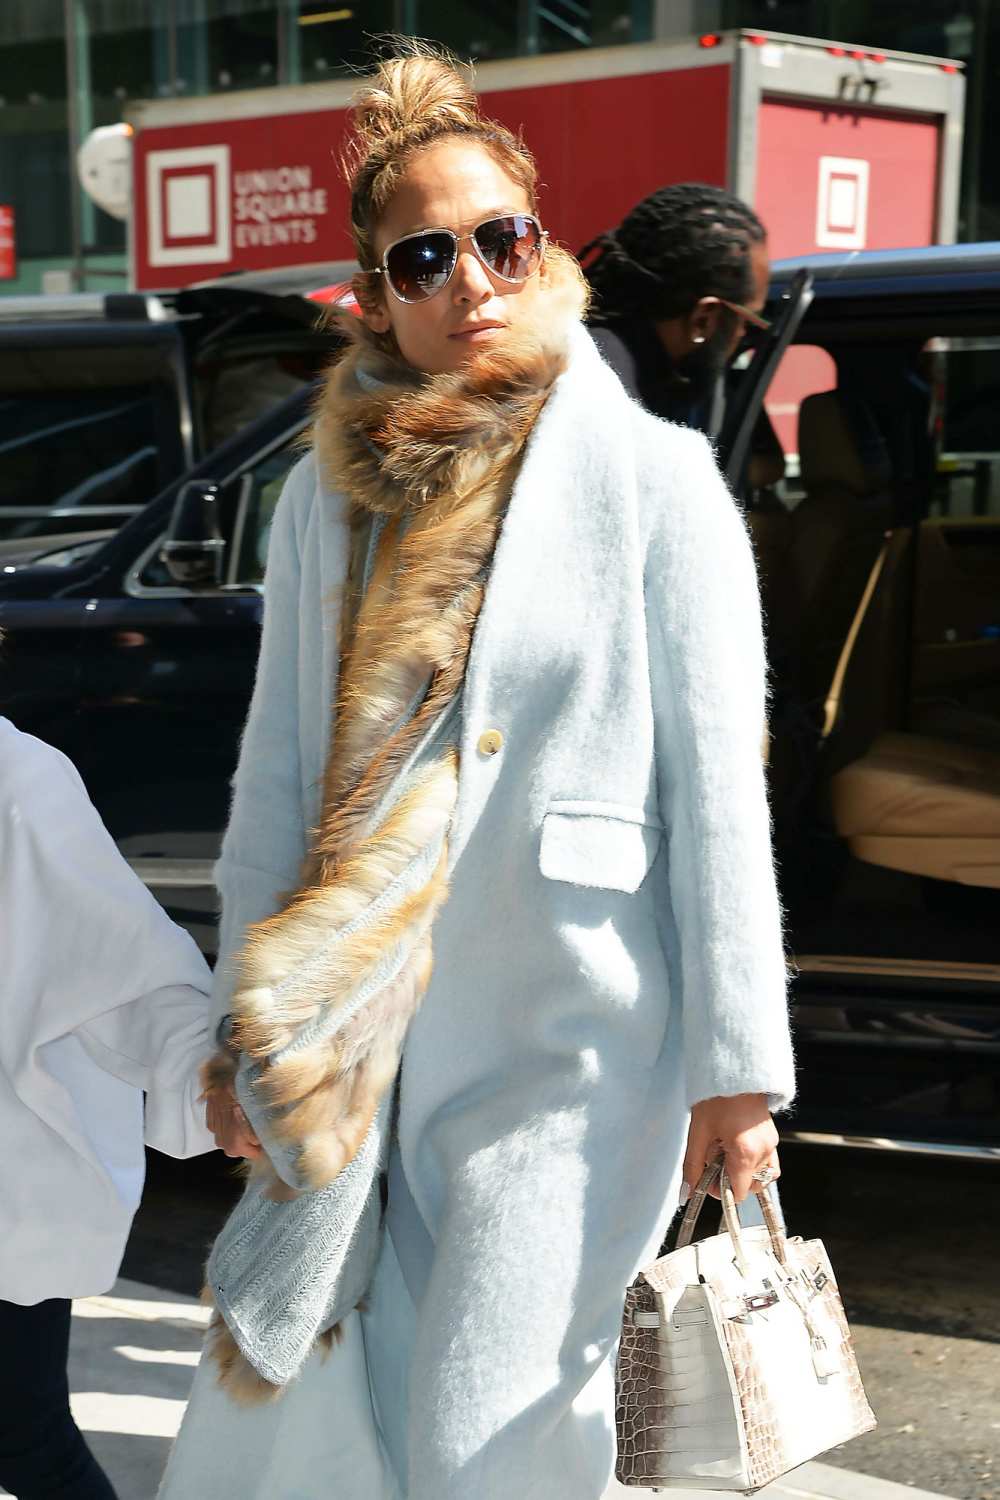 J. Lo Wore Over $100K In Clothes To Take Her Daughter Discount Shopping